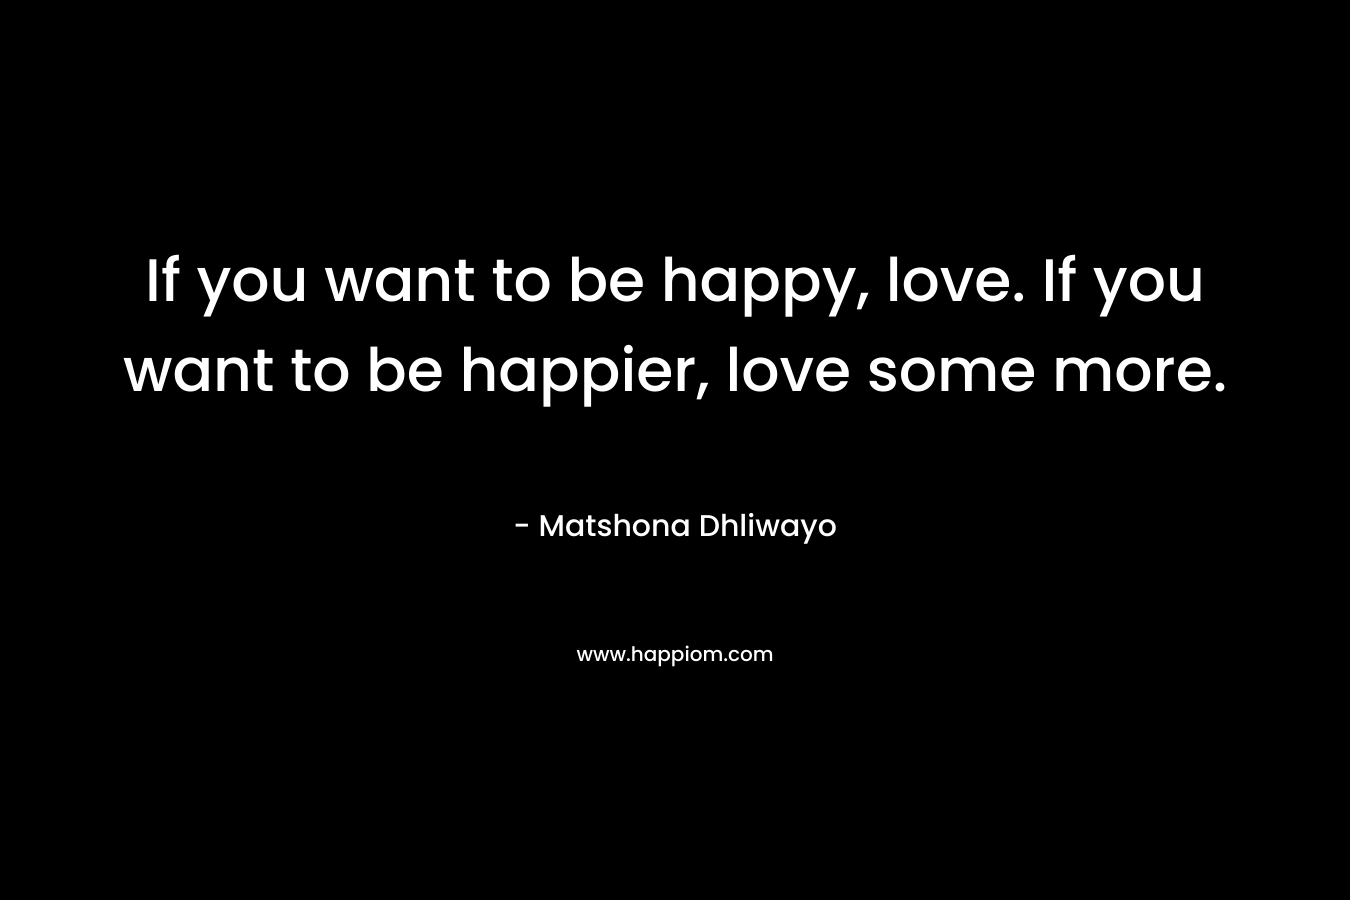 If you want to be happy, love. If you want to be happier, love some more.